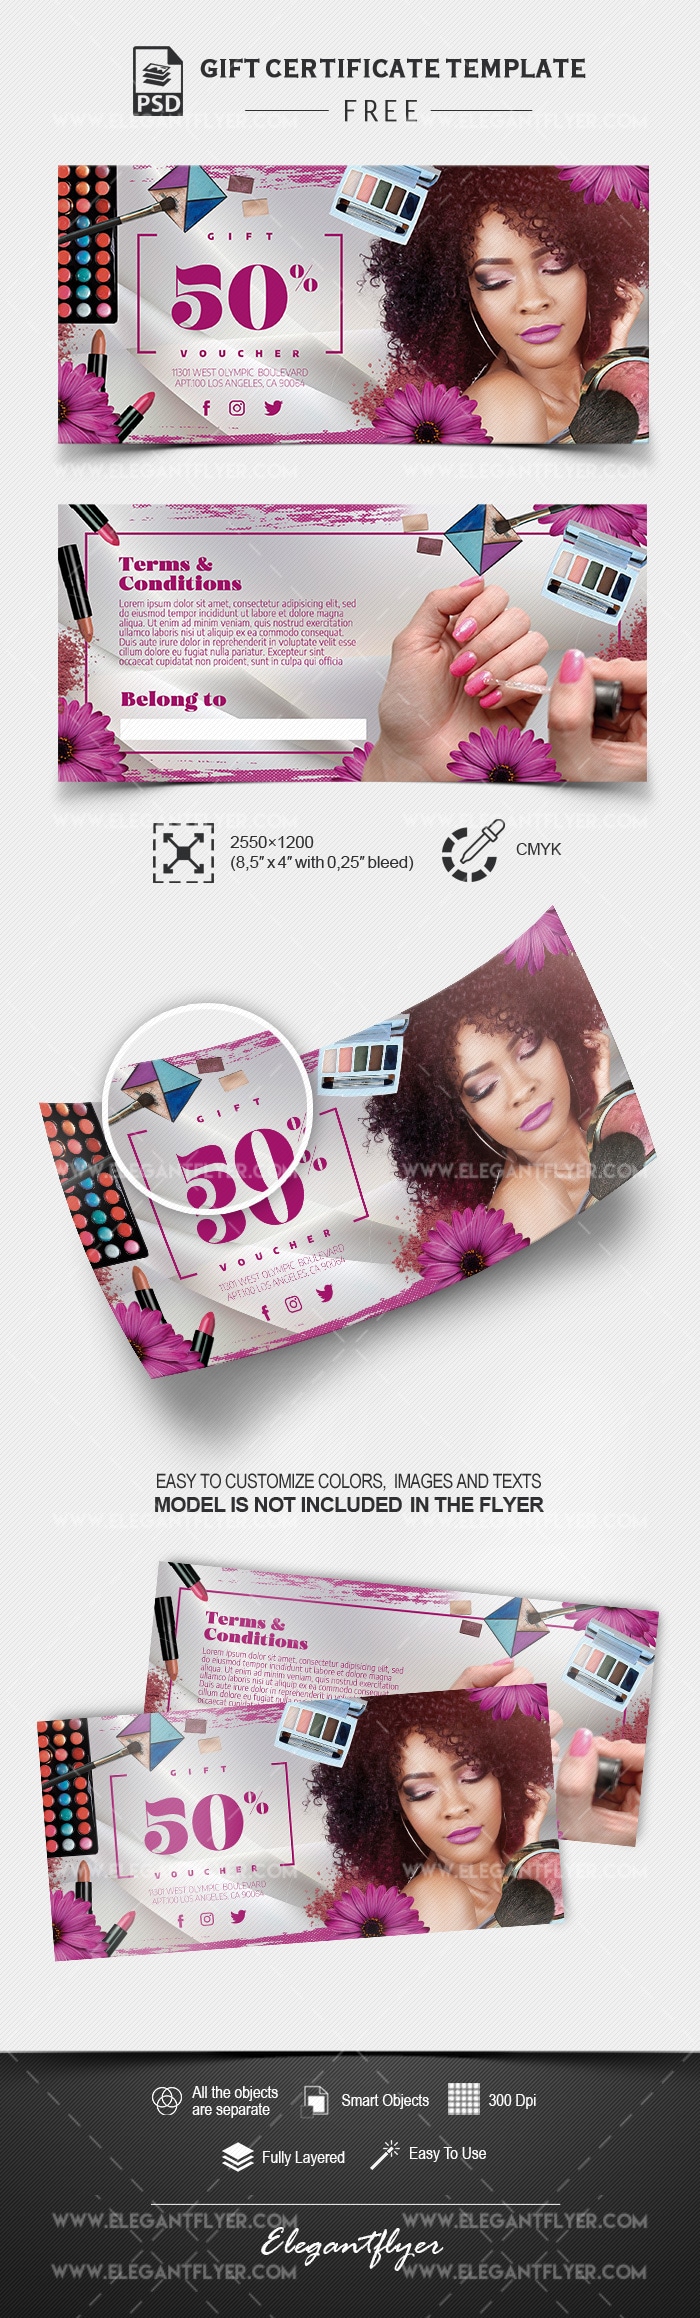 Free Gift Voucher for Cosmetic Shop PSD Mockup